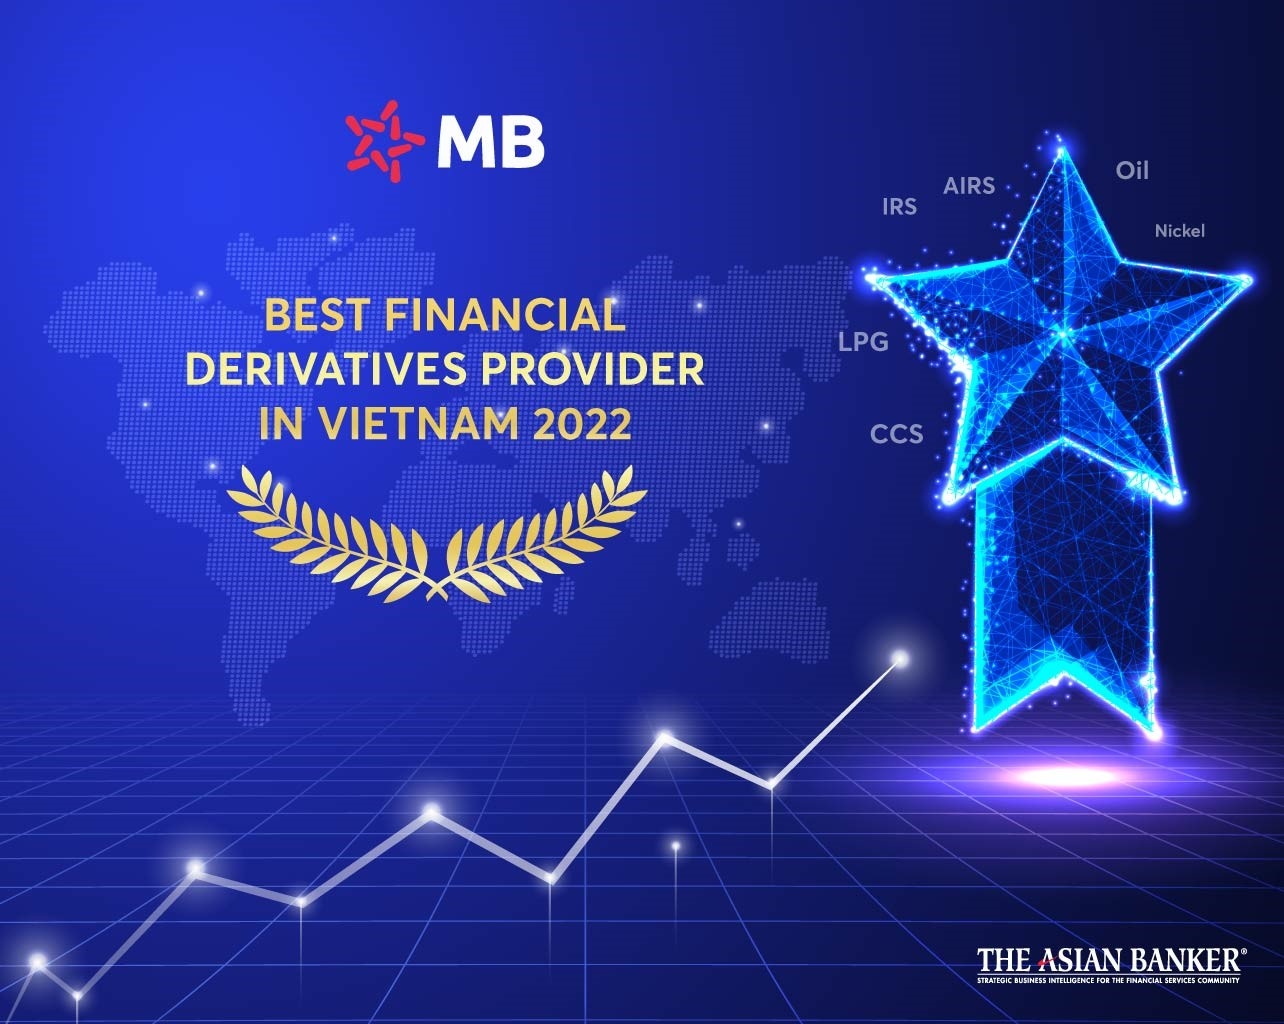 MB maintains its position as the market leader in Vietnam